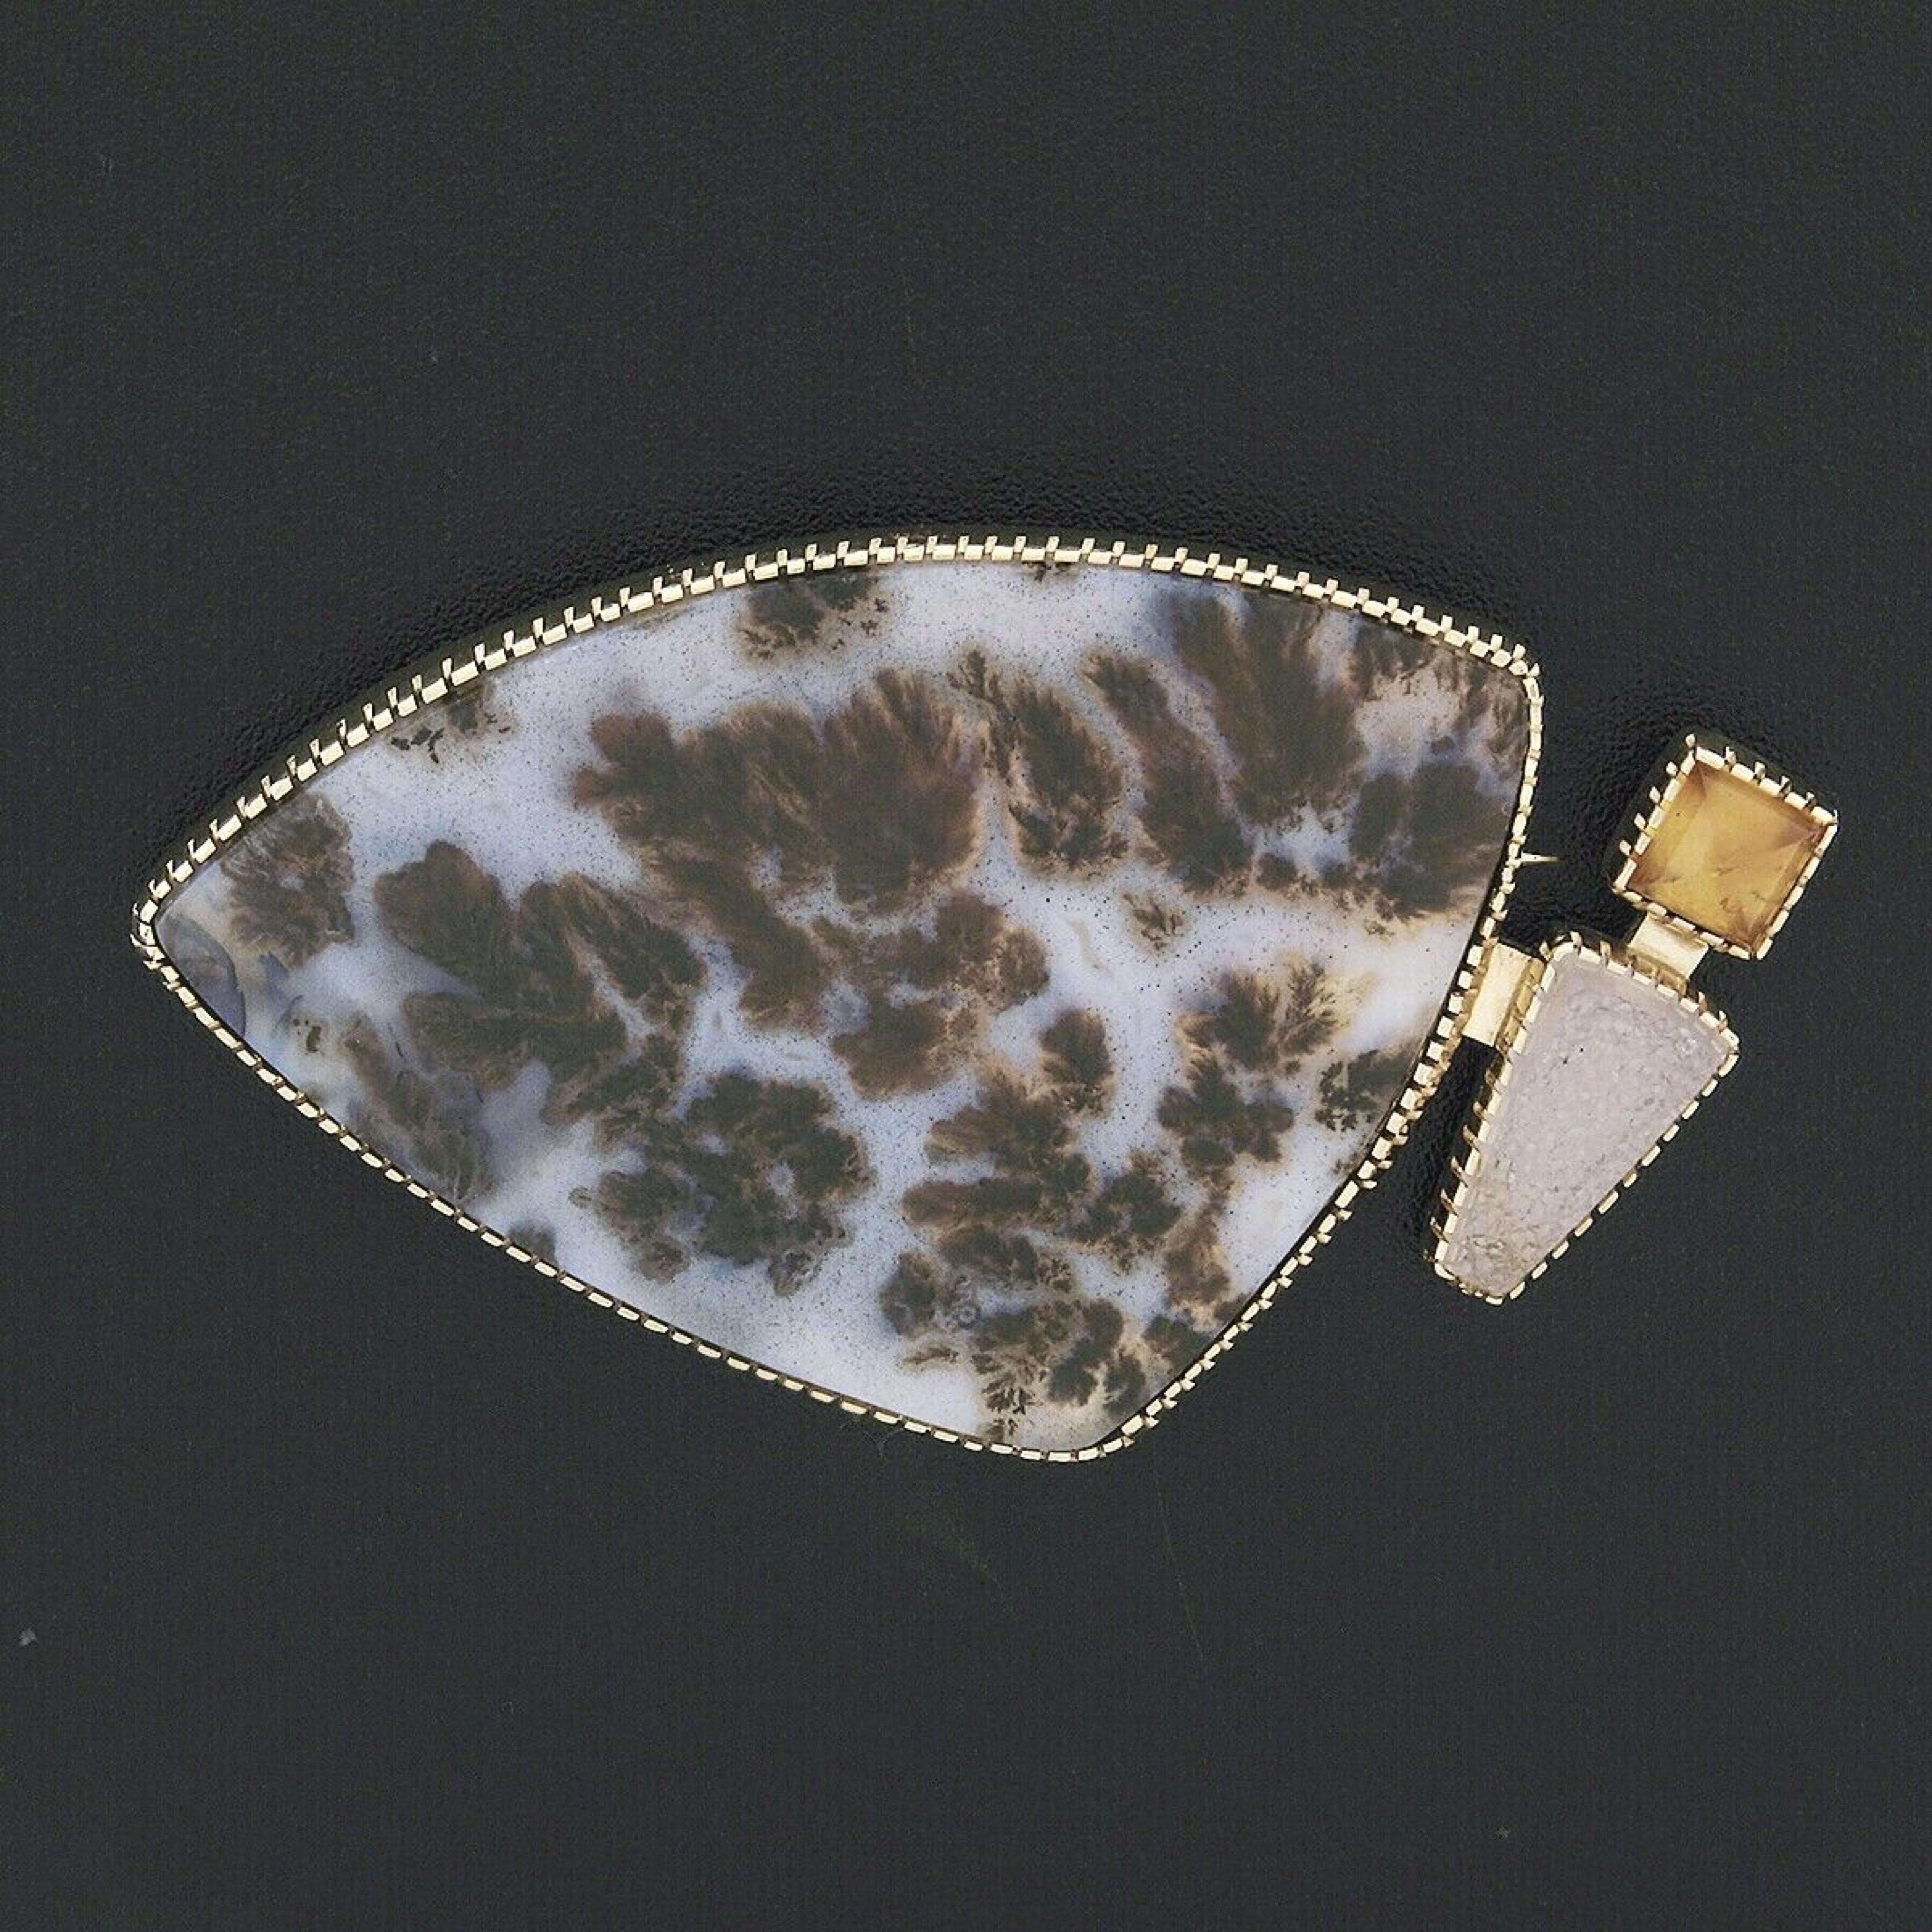 This large and unique designer brooch was crafted from solid 18k yellow gold. It features a large, flat top, free-form cut piece of natural agate accented on the side by two smaller stones. The agate has a bluish-white base color with large brown